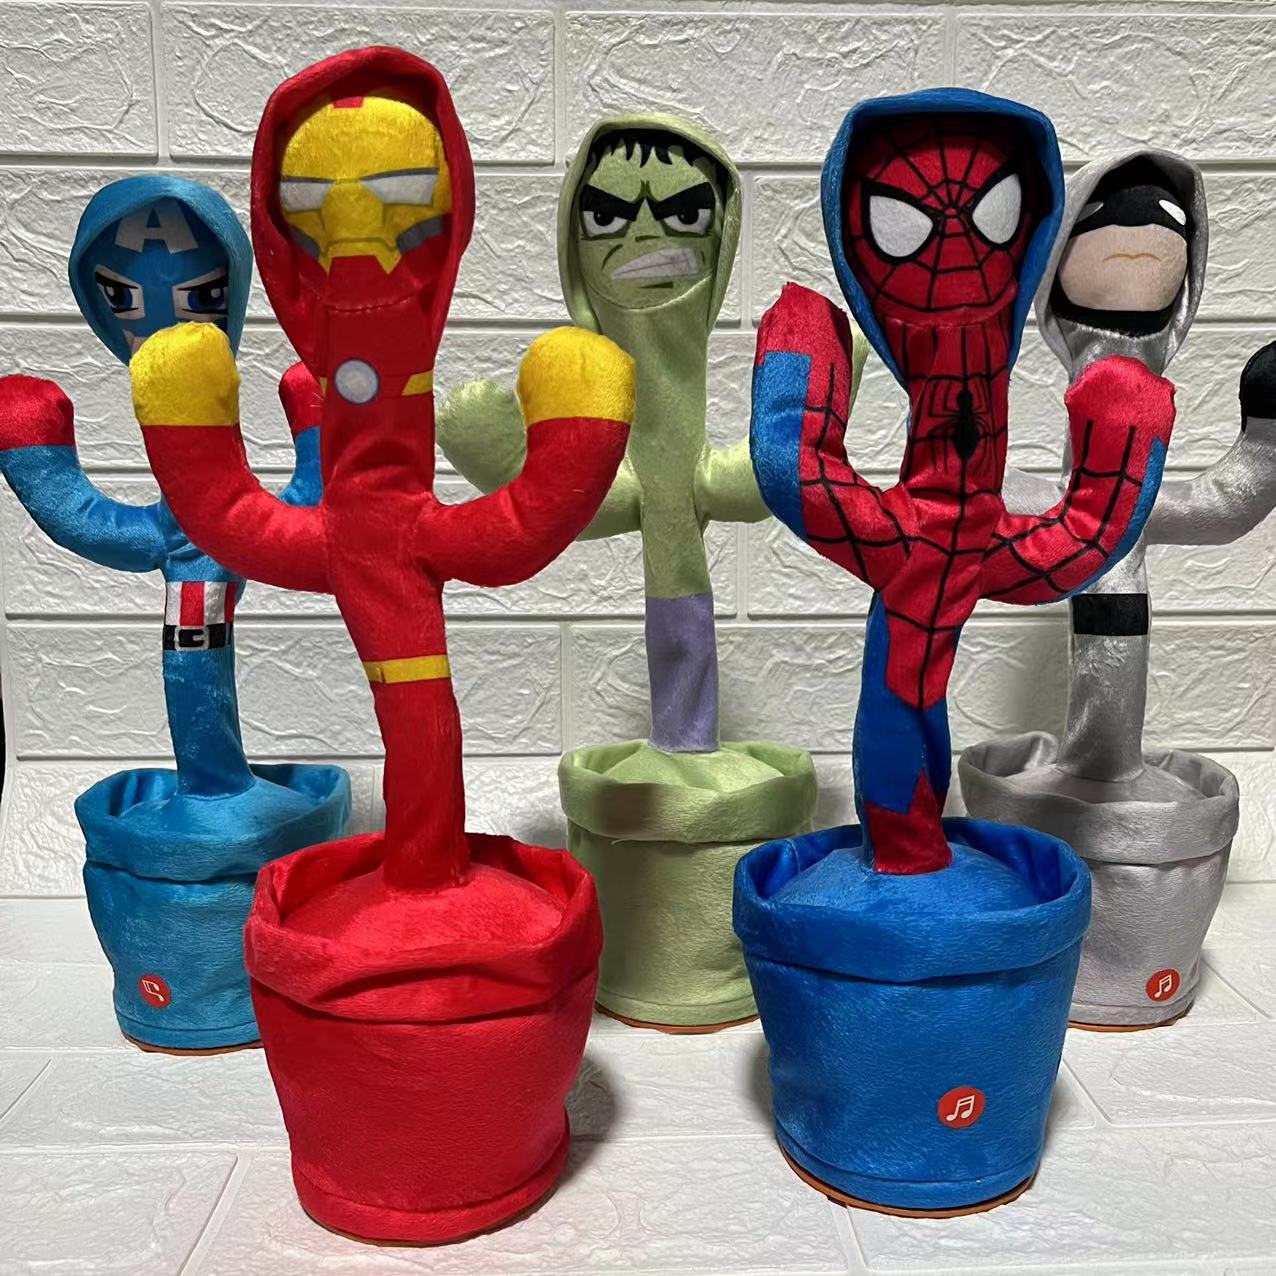 Spiderman Talking Cactus Doll - Marvel Avengers Sound Record & Repeat Toy for Kids - Captain America & Iron Man also Available!